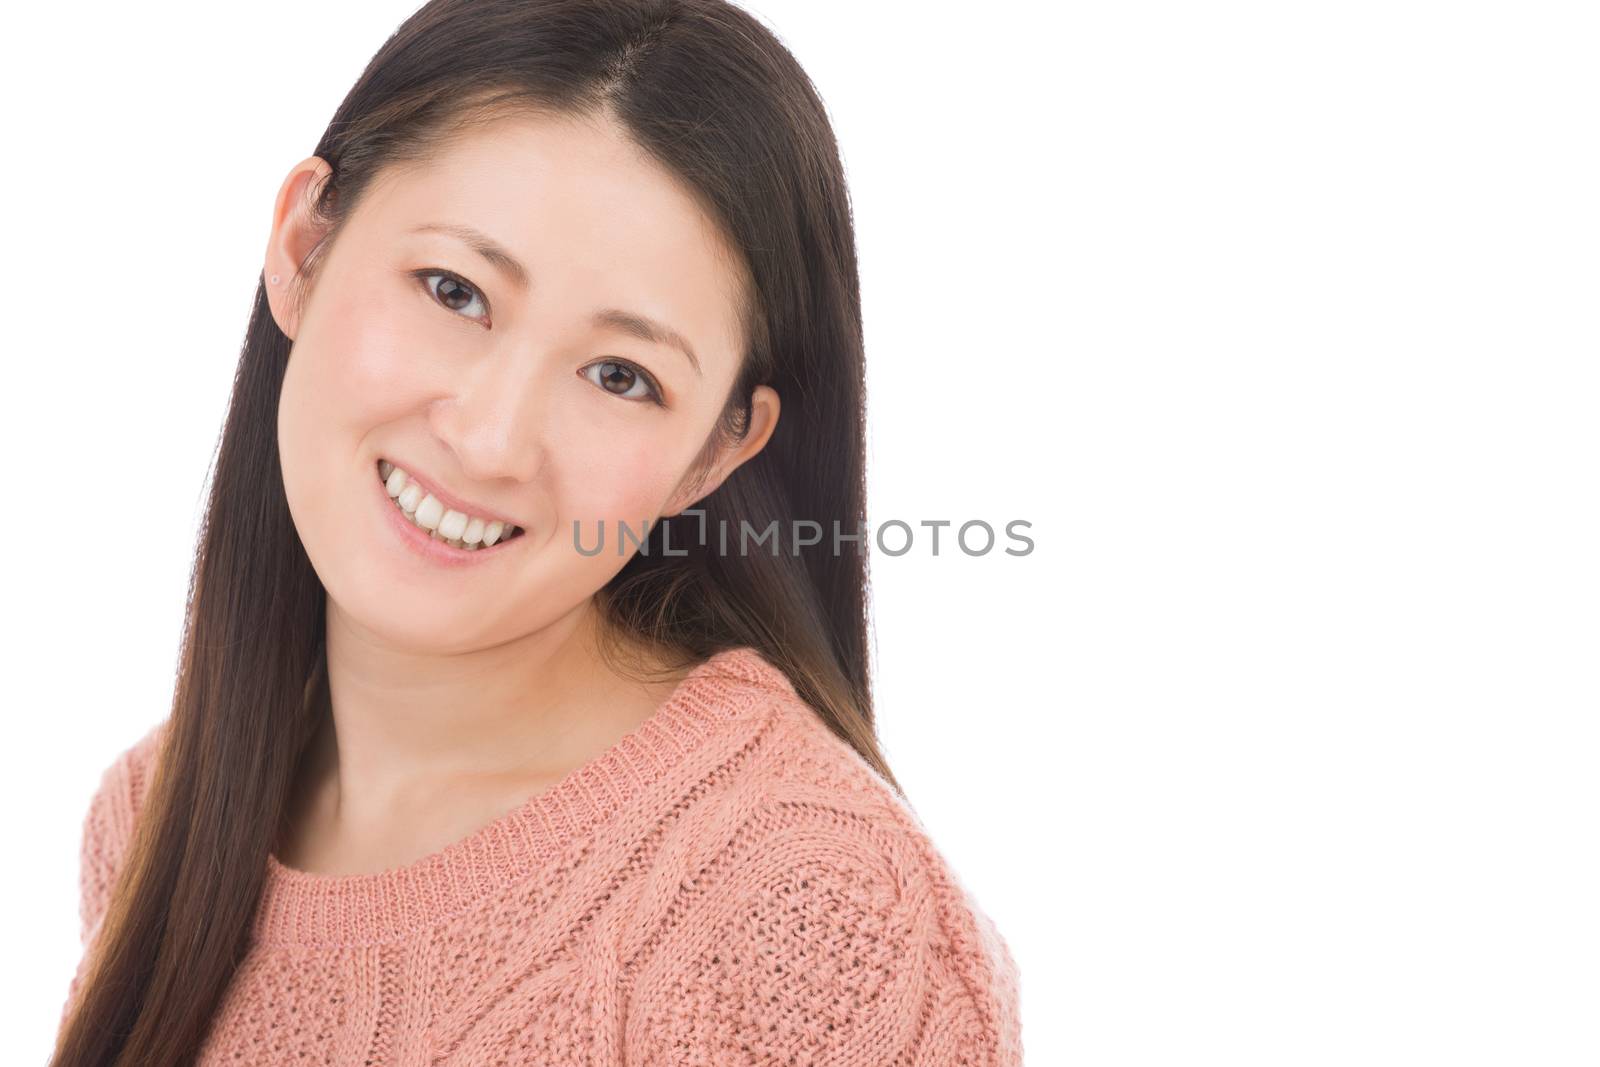 A headshot of a Japanese woman in hear early 30s on a simple white background.